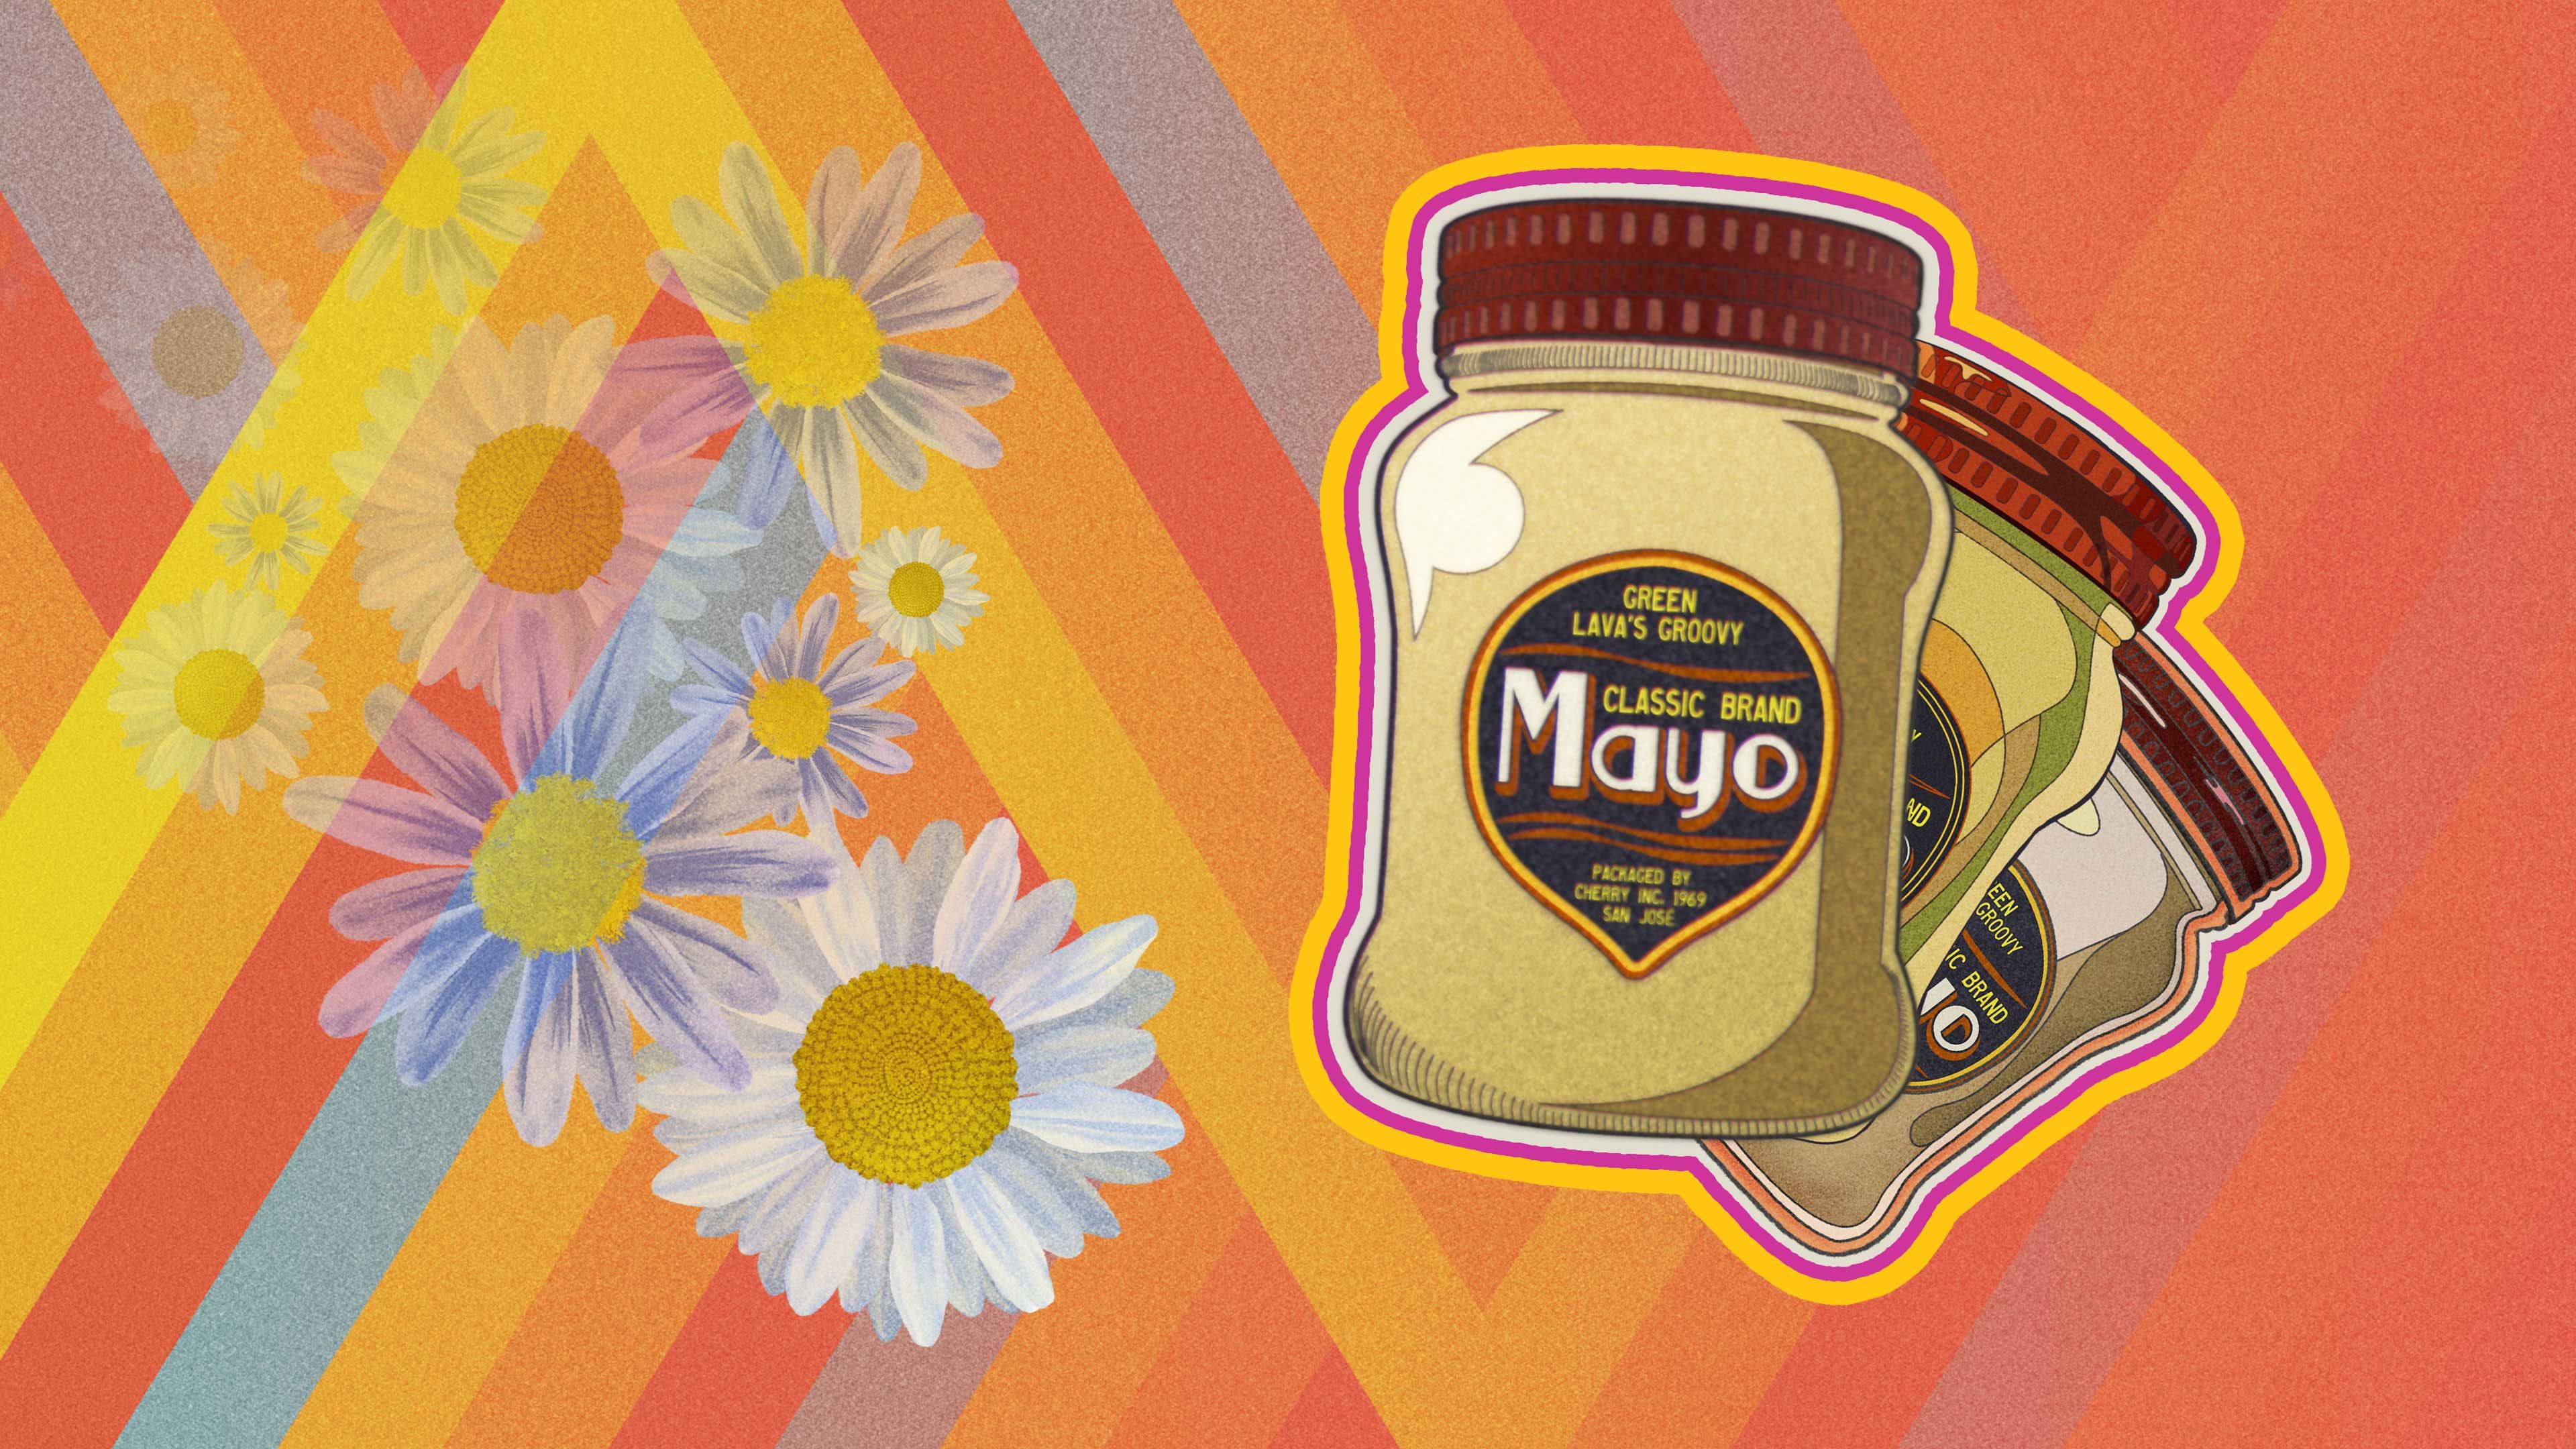 My Name is Mayo 3 cover image